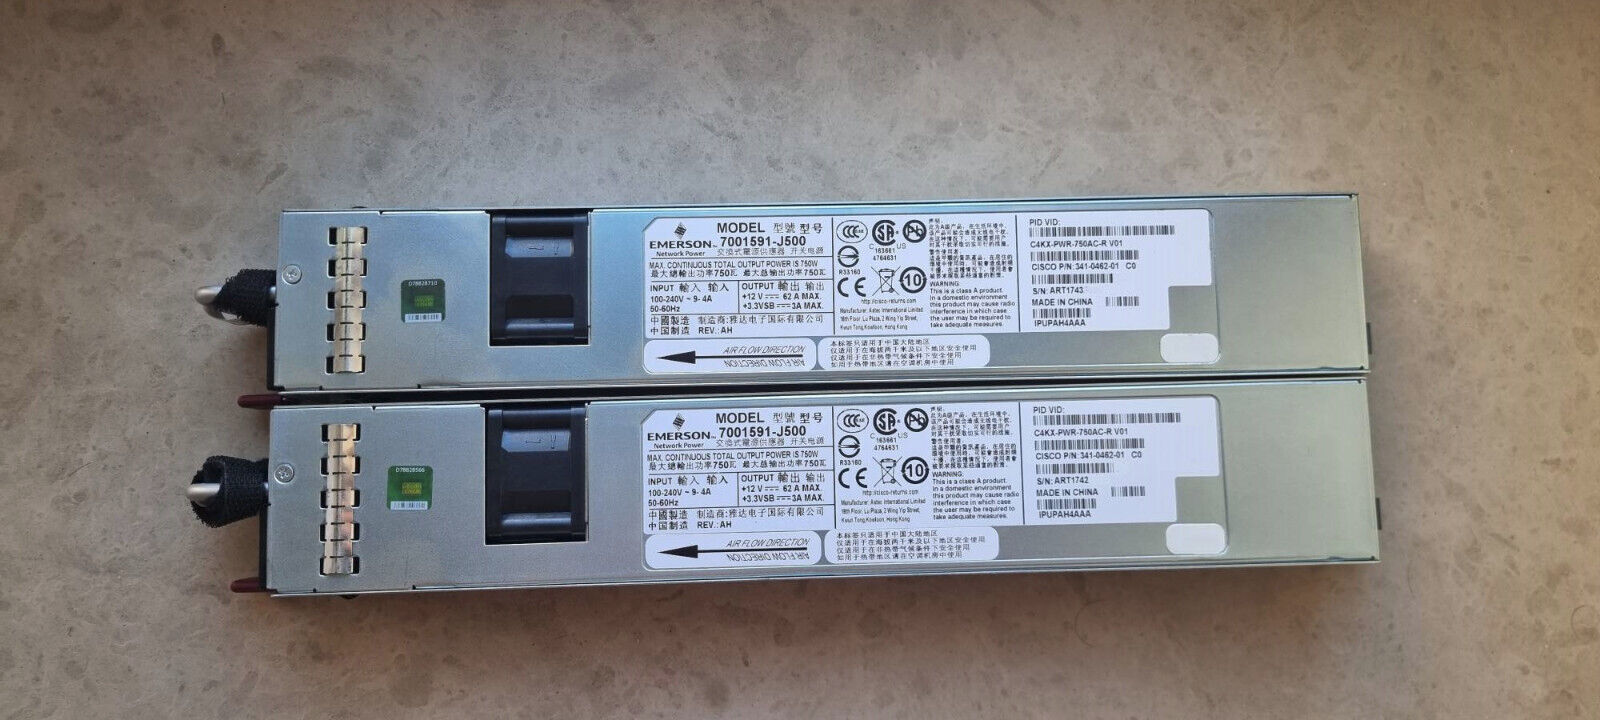 LOT of 2 Cisco C4KX-PWR-750AC-R 750W AC Power Supply for 4500-X Series Switches